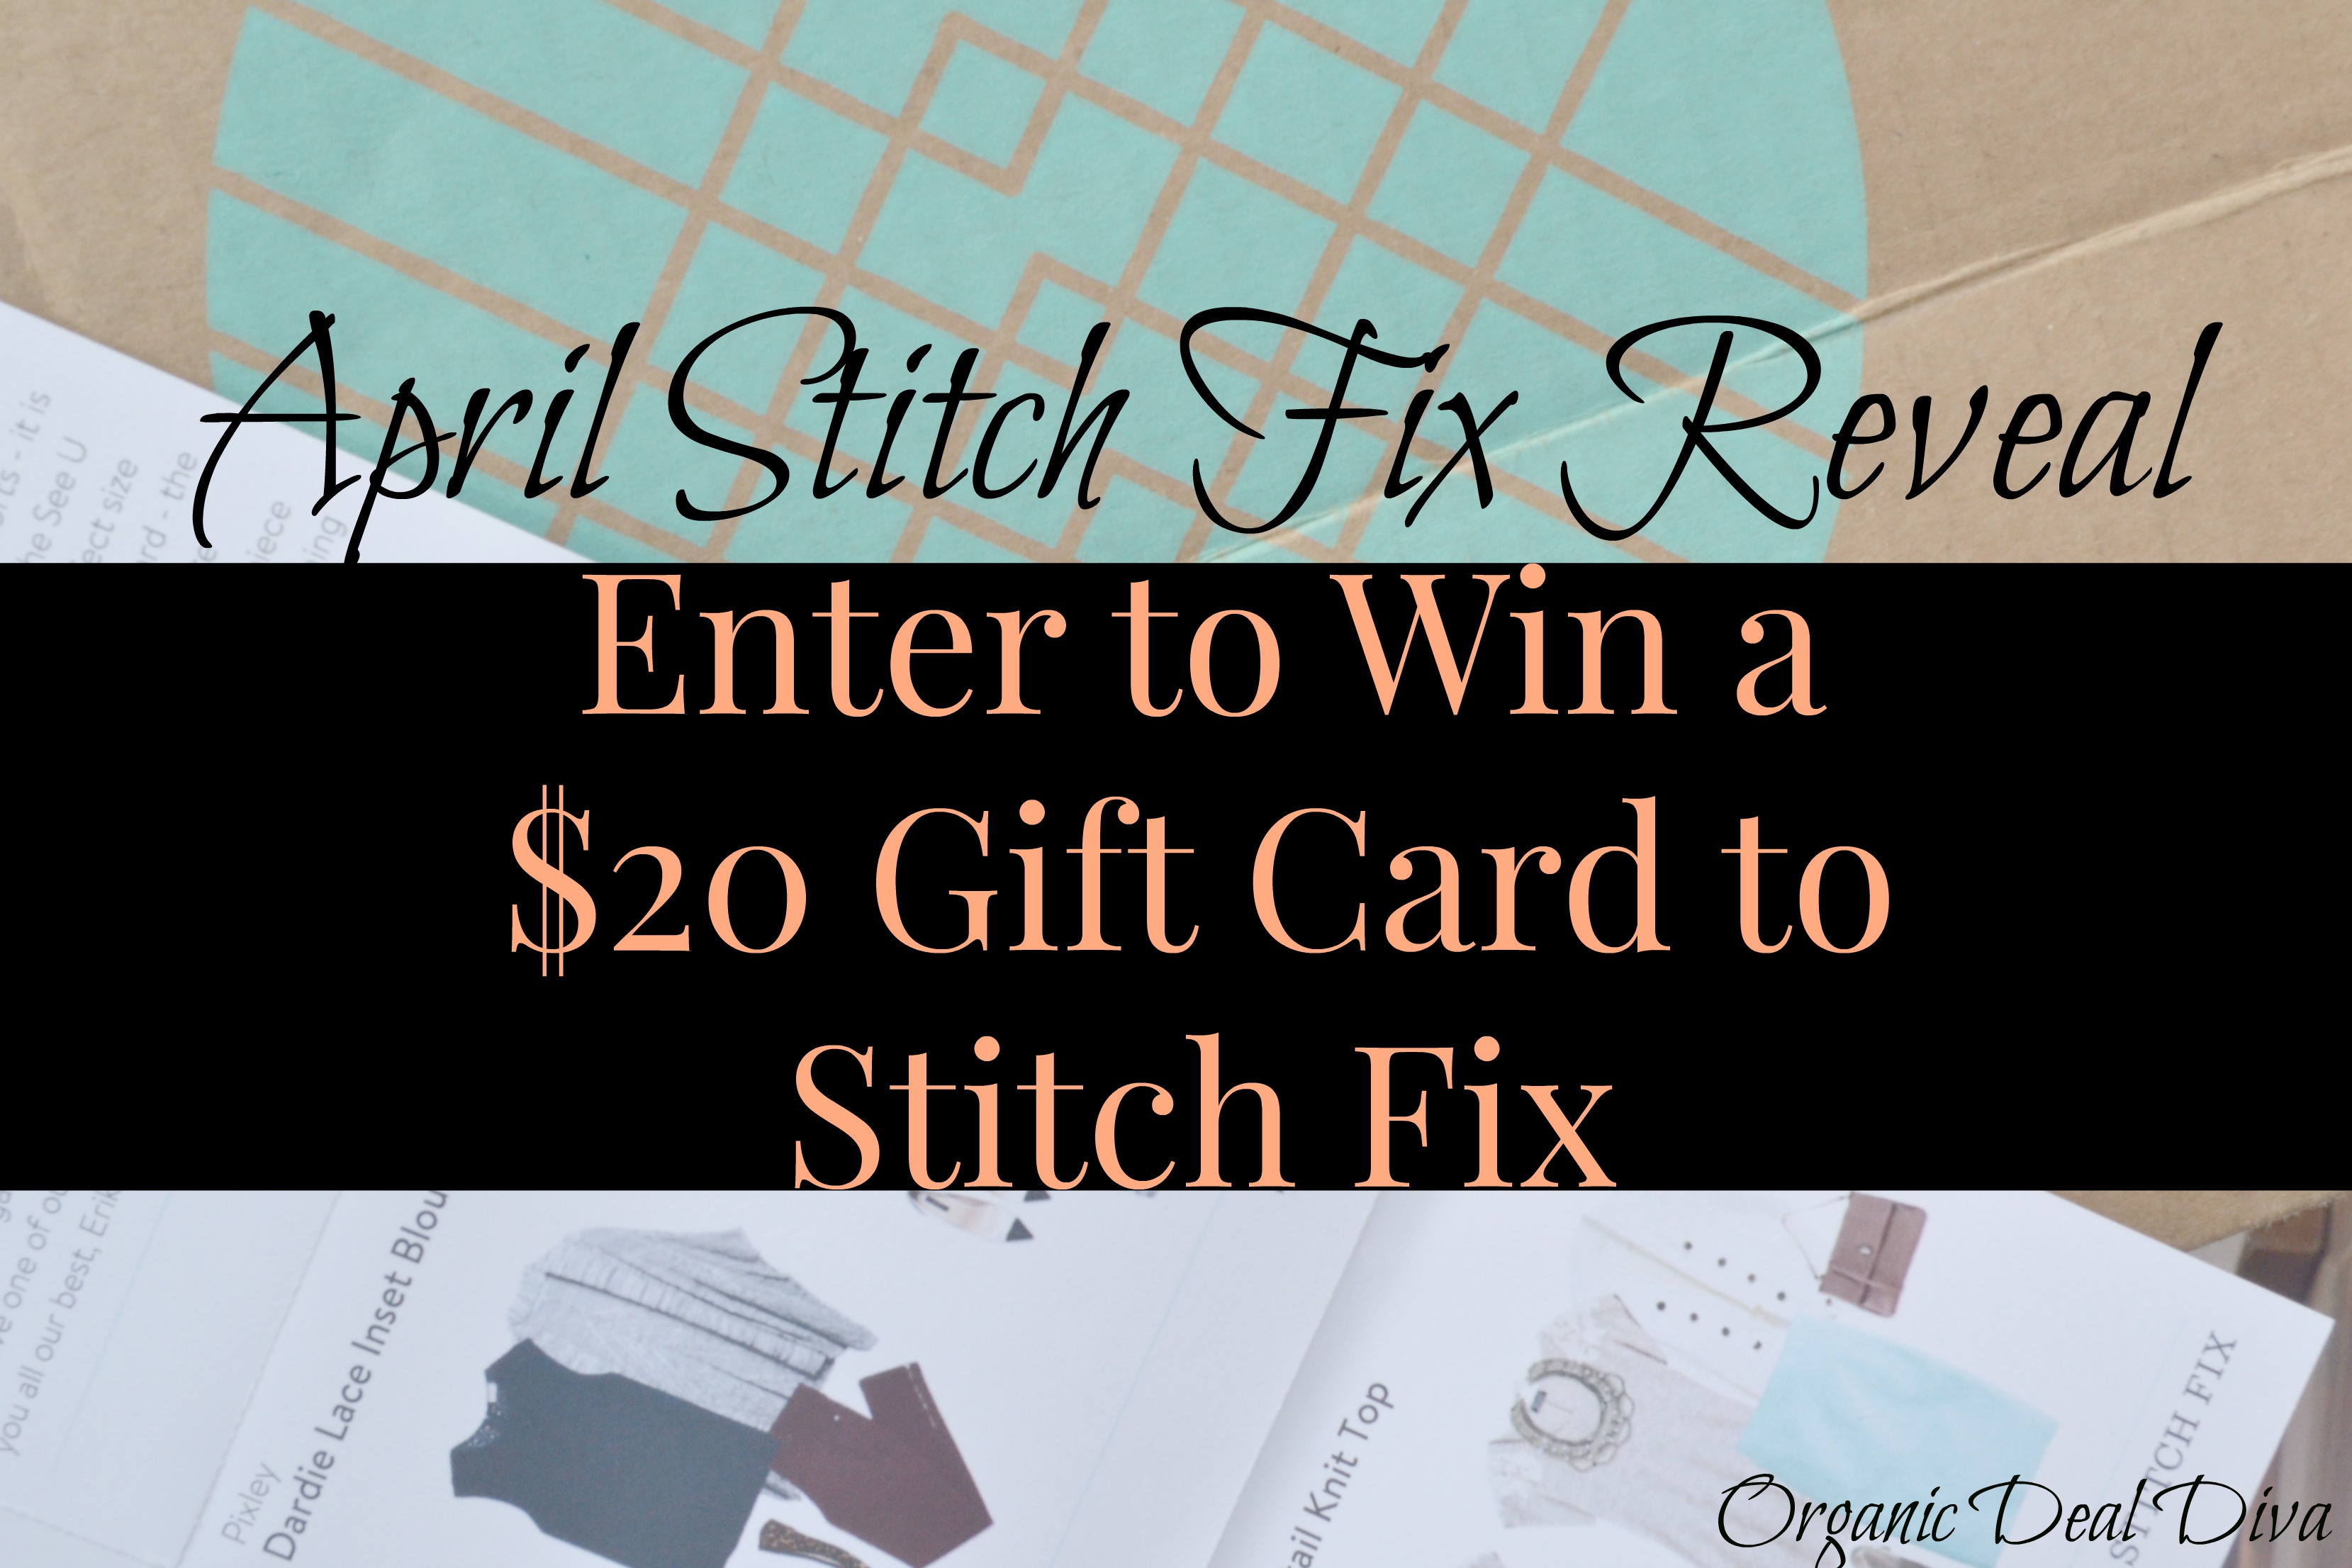 Enter to win a $20 Stitch Fix Gift Card